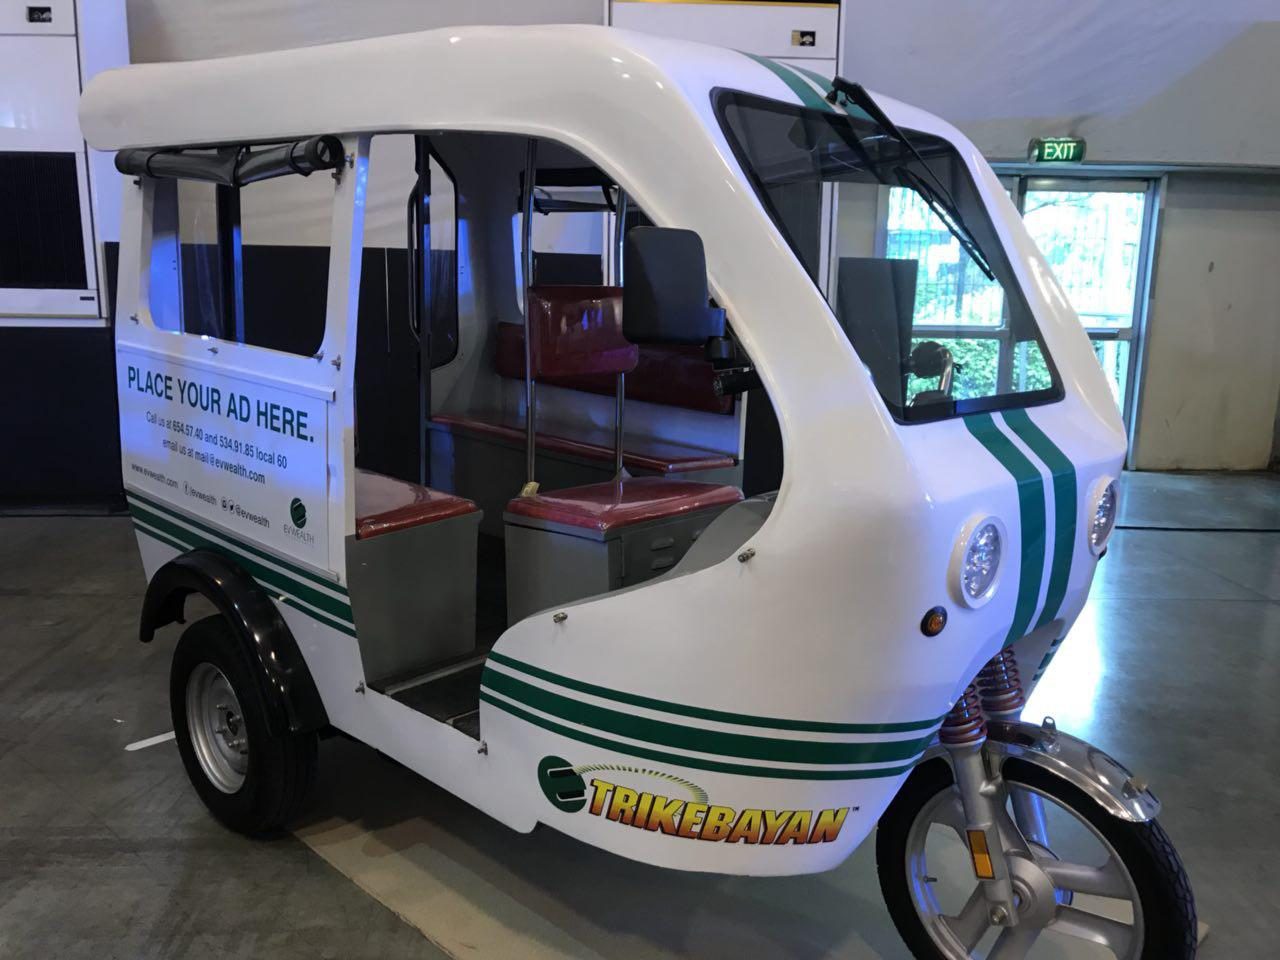 MORE. EVWealth's electric tricycle called E-Trike Bayan can fit up to 6 passengers, more than the average tricycle which can fit 4 passengers. 